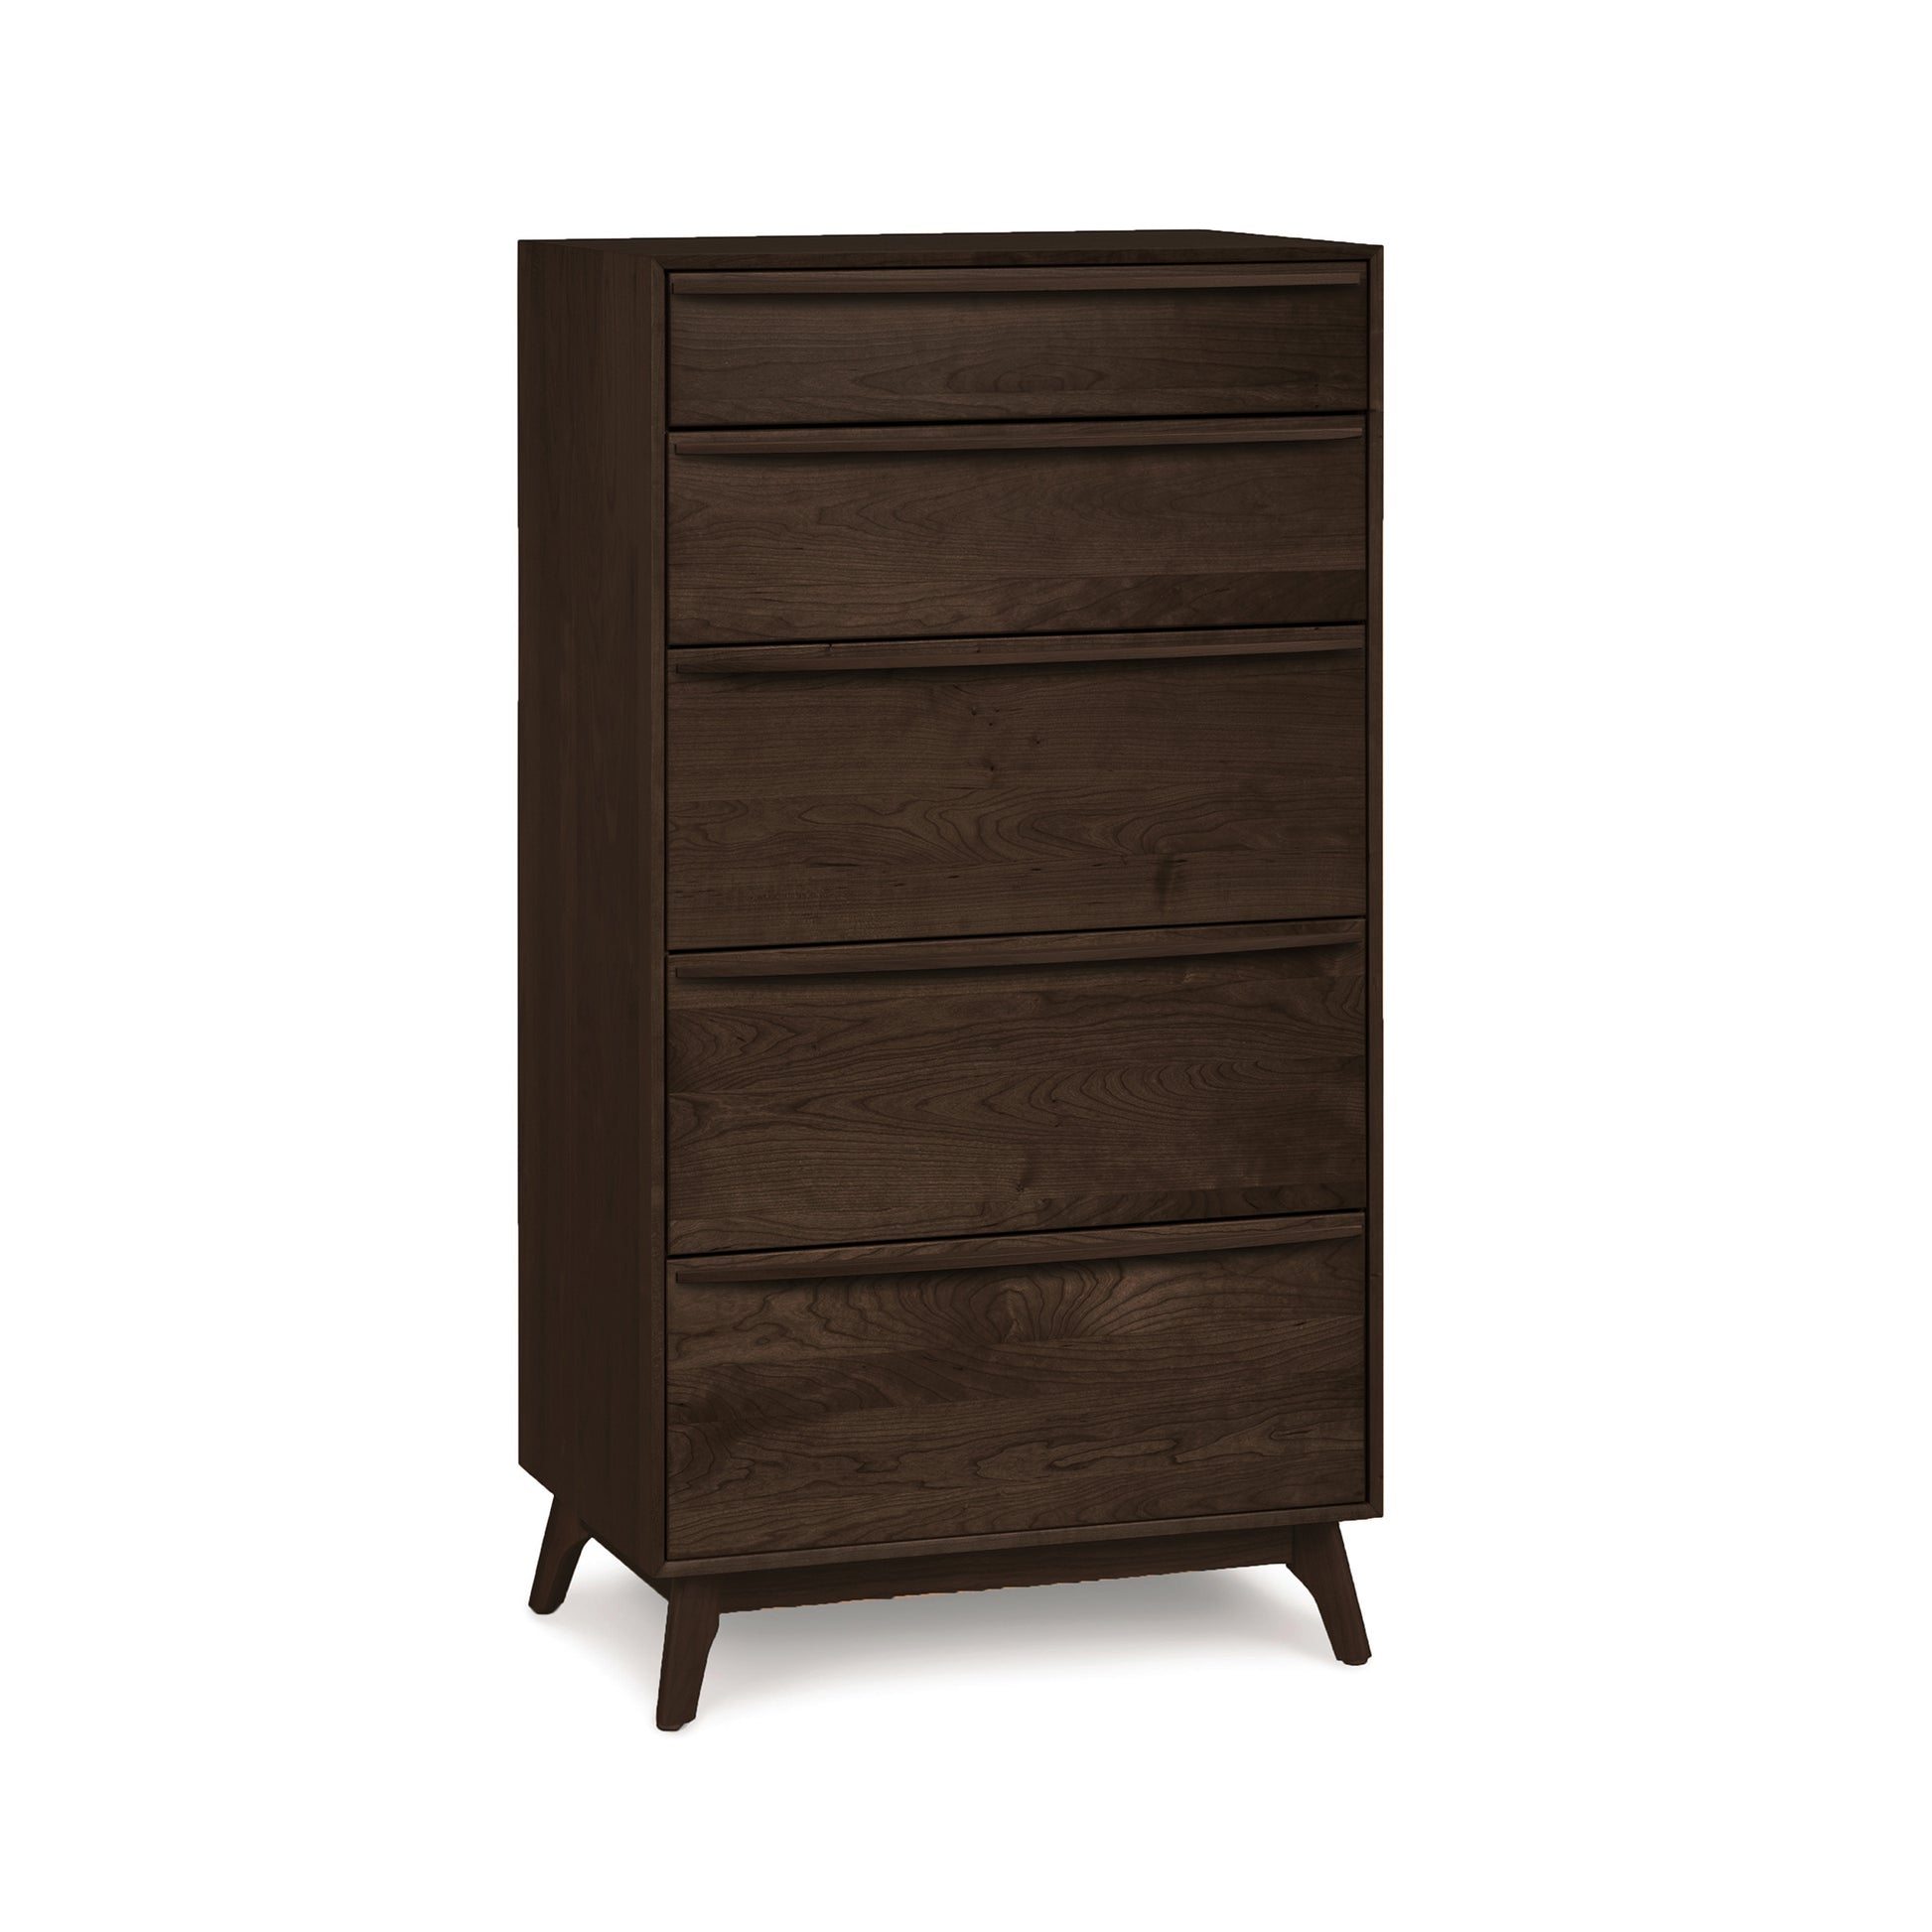 A Catalina 5-Drawer Chest by Copeland Furniture with solid wood construction, perfect for bedroom furniture.